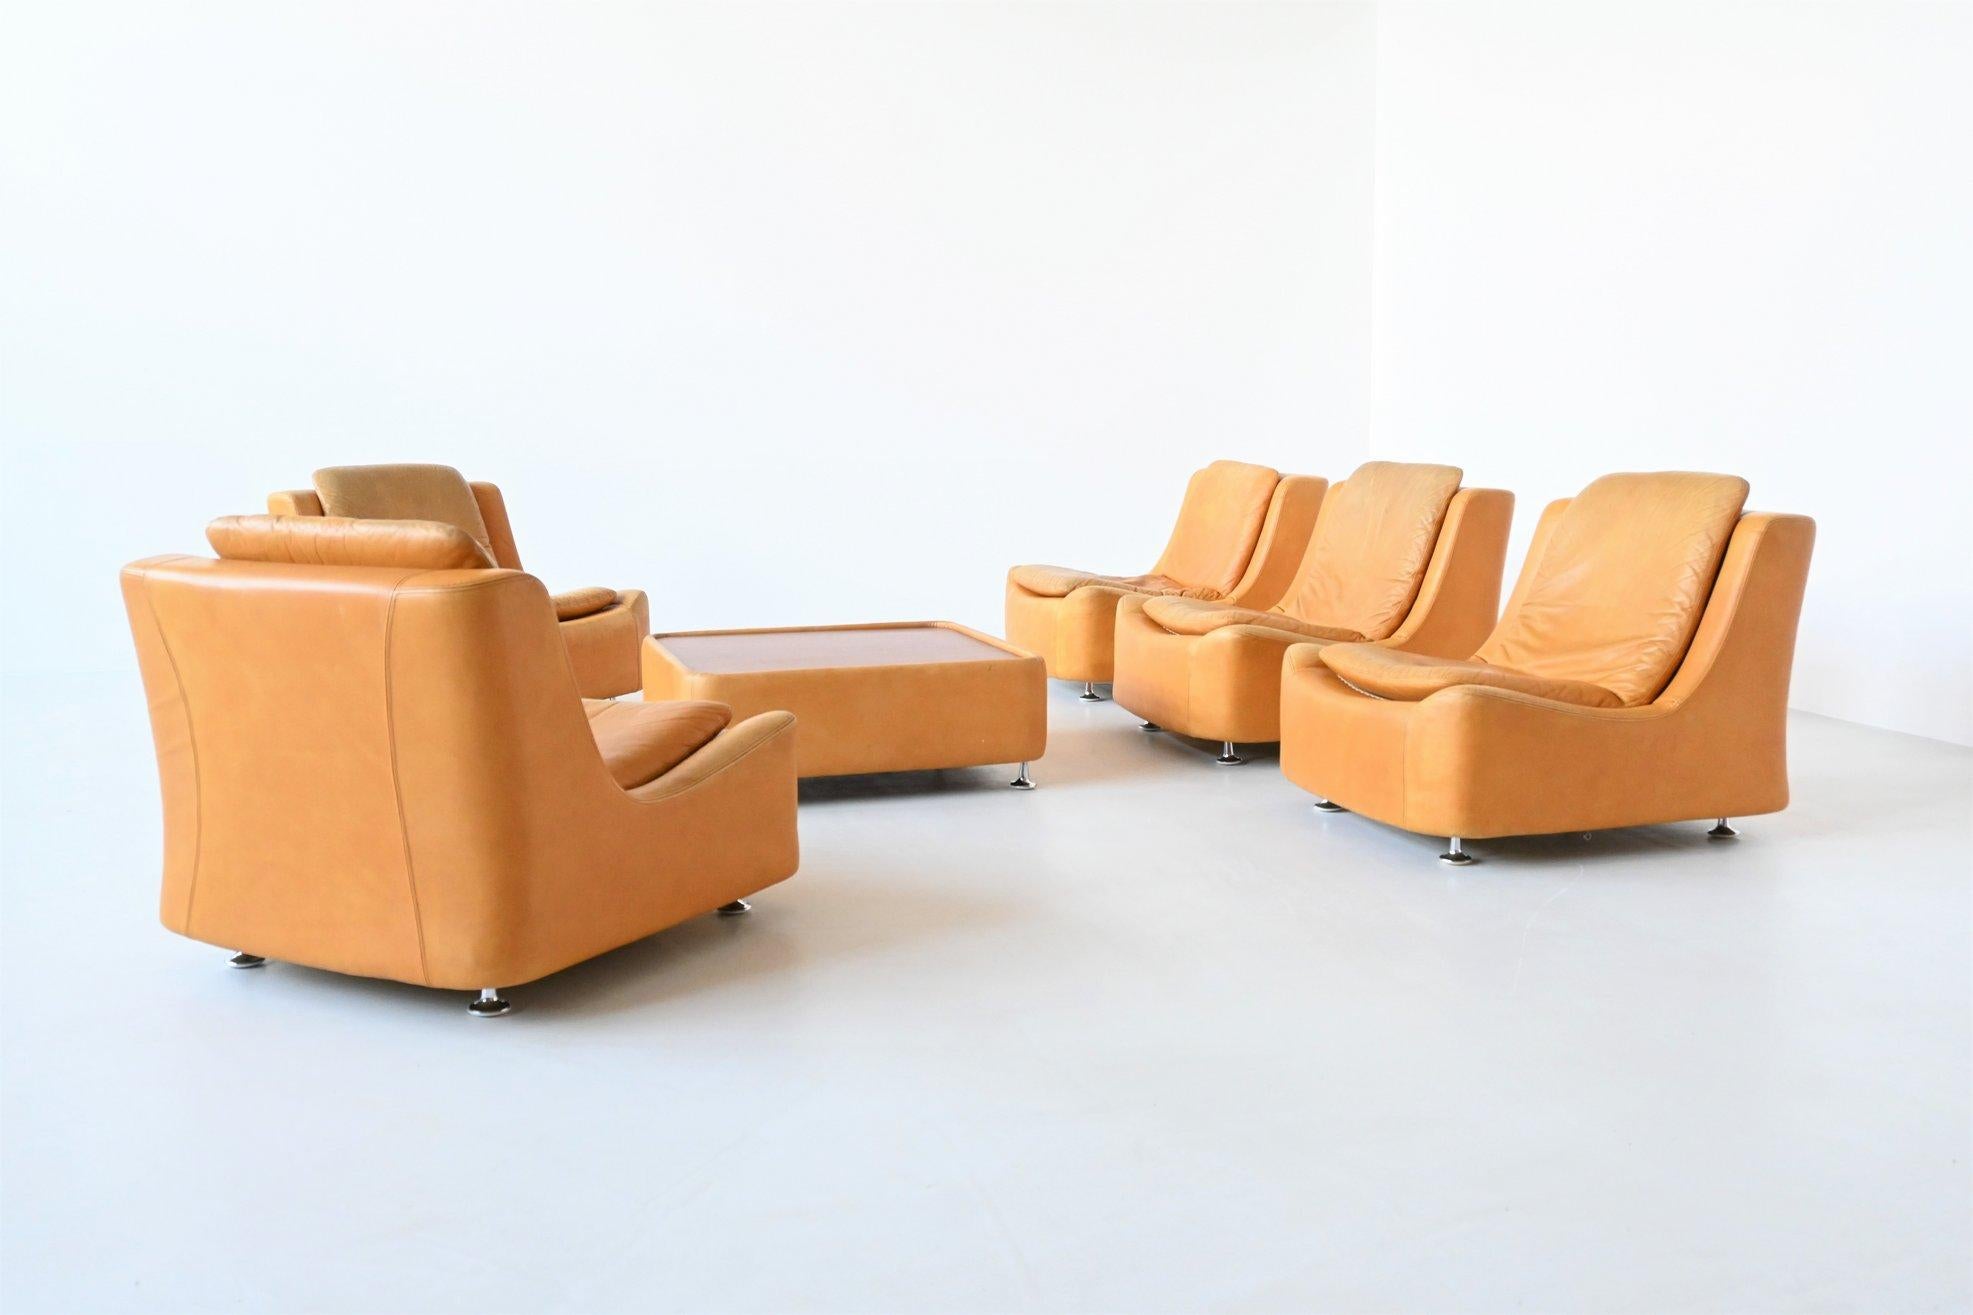 Beautiful and playful sofa set by unknown designer or manufacturer, Germany 1970. This very nice set exists of five seating modules and one coffee table. They are made of molded foam upholstered with nicely stitched and high quality cognac leather